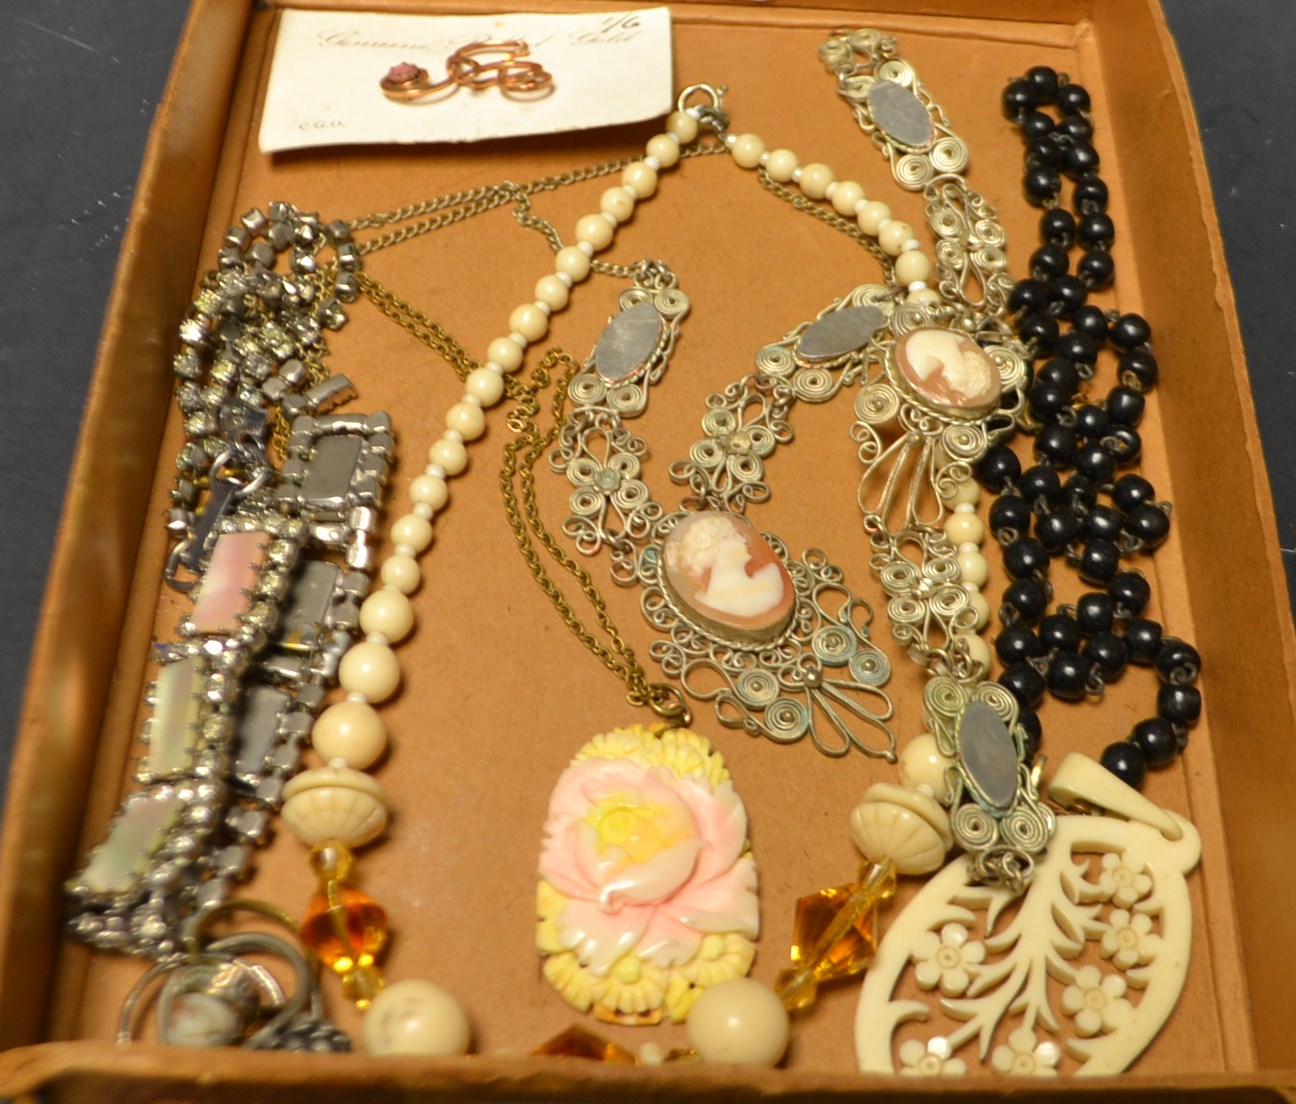 Costume Jewellery - an Italian filigree and shell cameo necklace and bracelet, c.